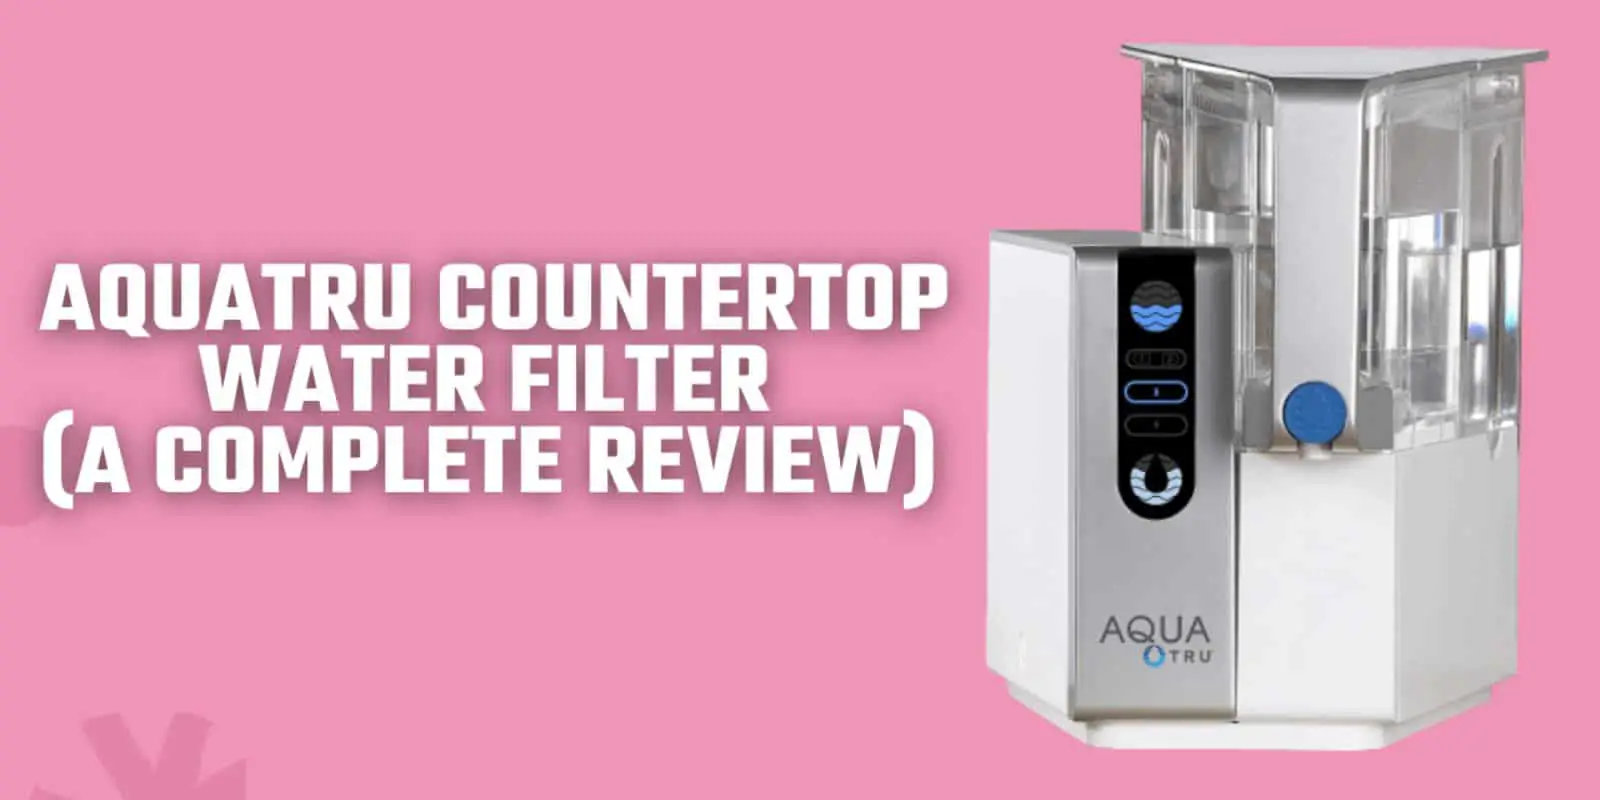 AquaTru Countertop Water Filter (A Complete Review) | Specification, Pros & Cons